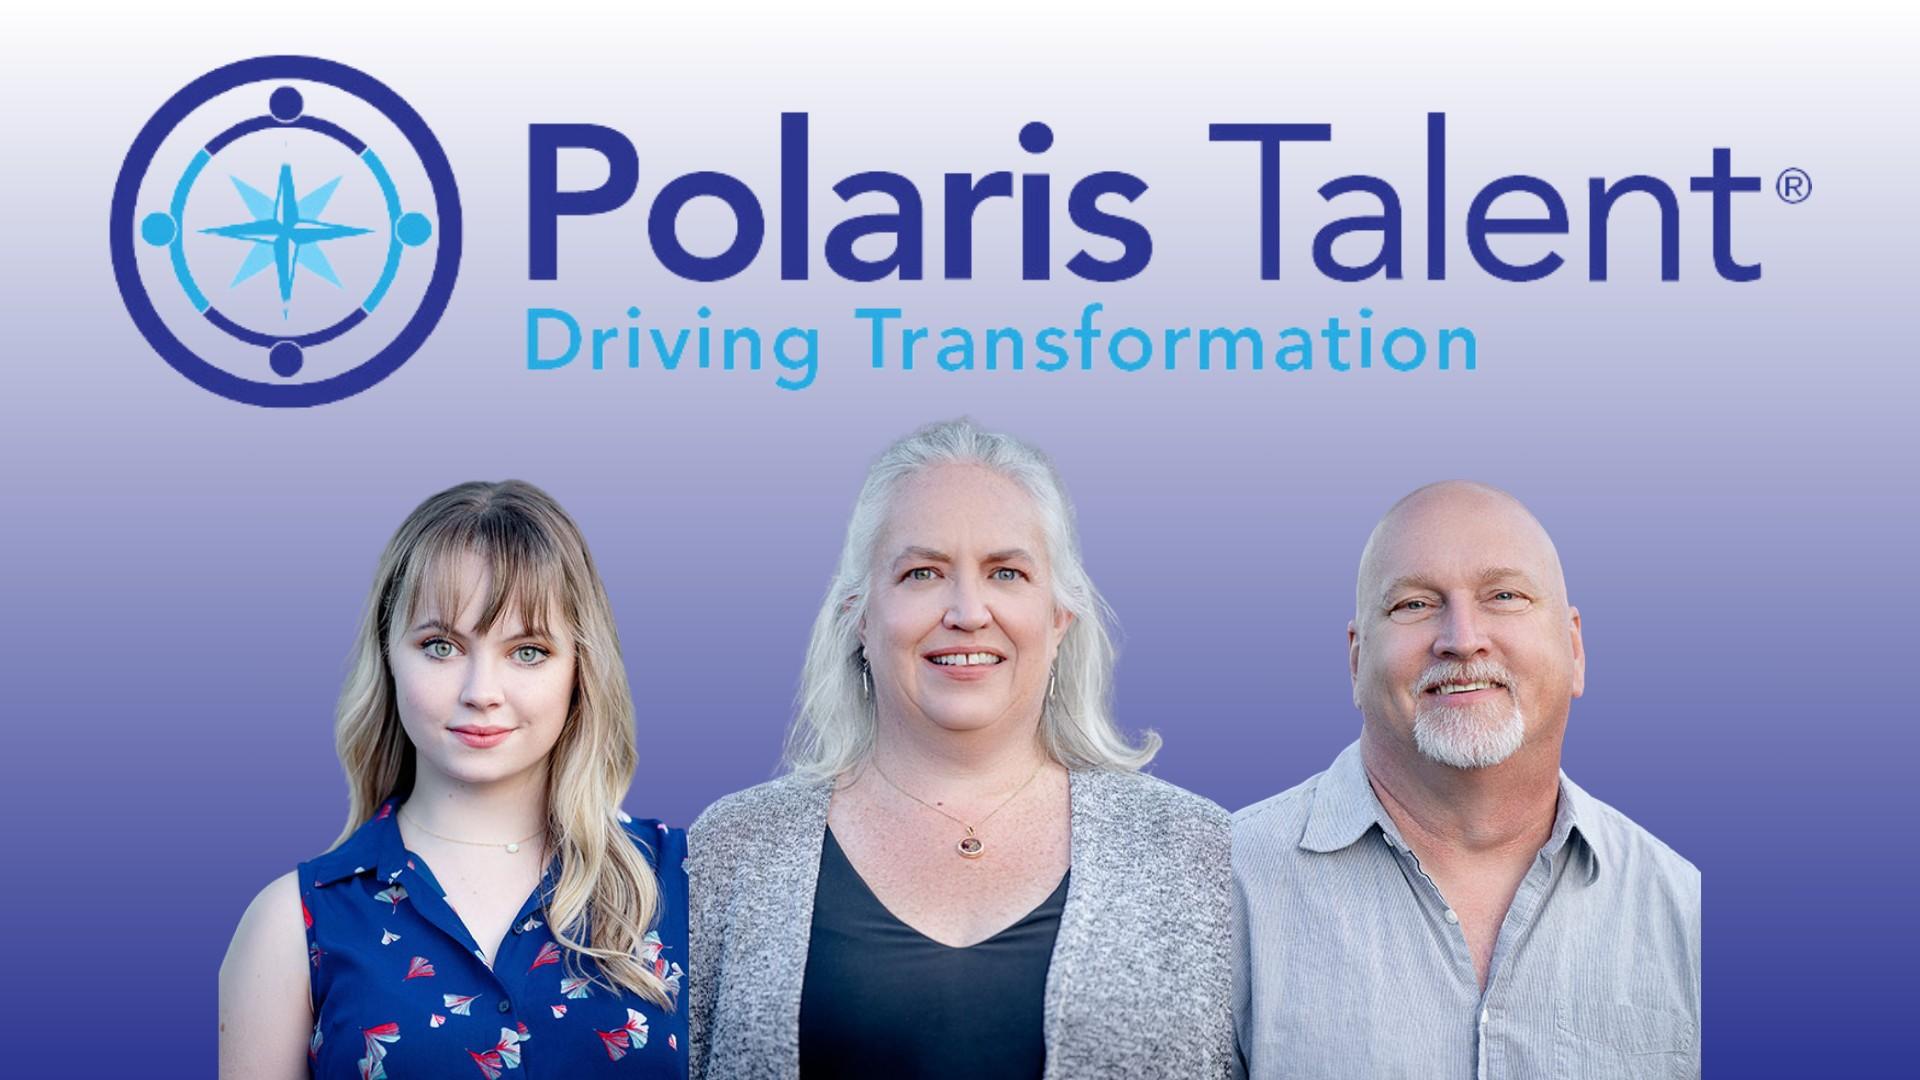 Polaris Talent to Join Shift Up Now as a Corporate Member